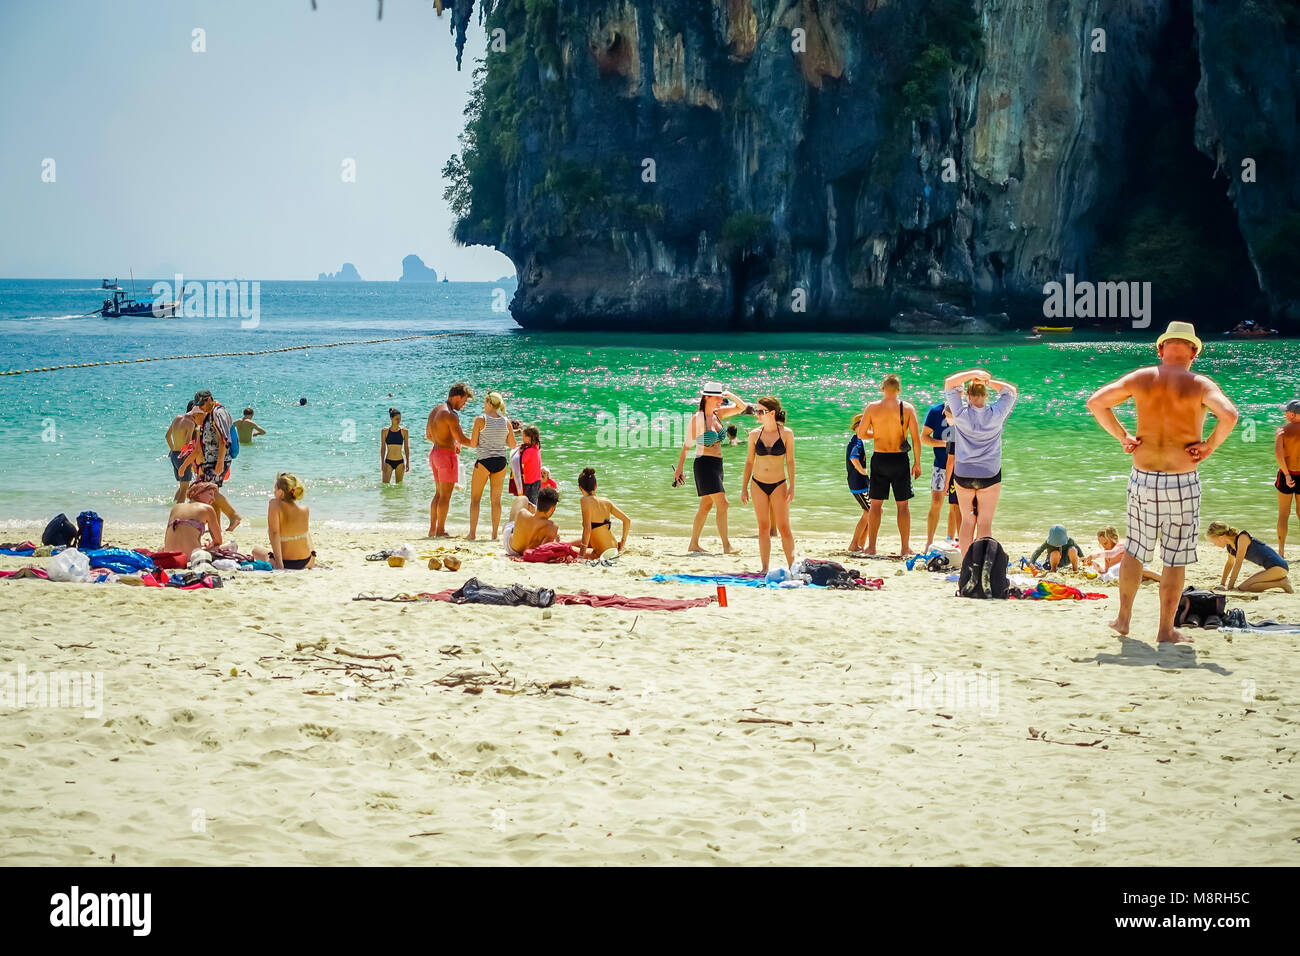 PHRA NANG, THAILAND - FEBRUARY 09, 2018: Beautiful outdoor view of unidentified people enjoying the beautiful sunny day, white sand and turquoise water on Phra nang island Stock Photo